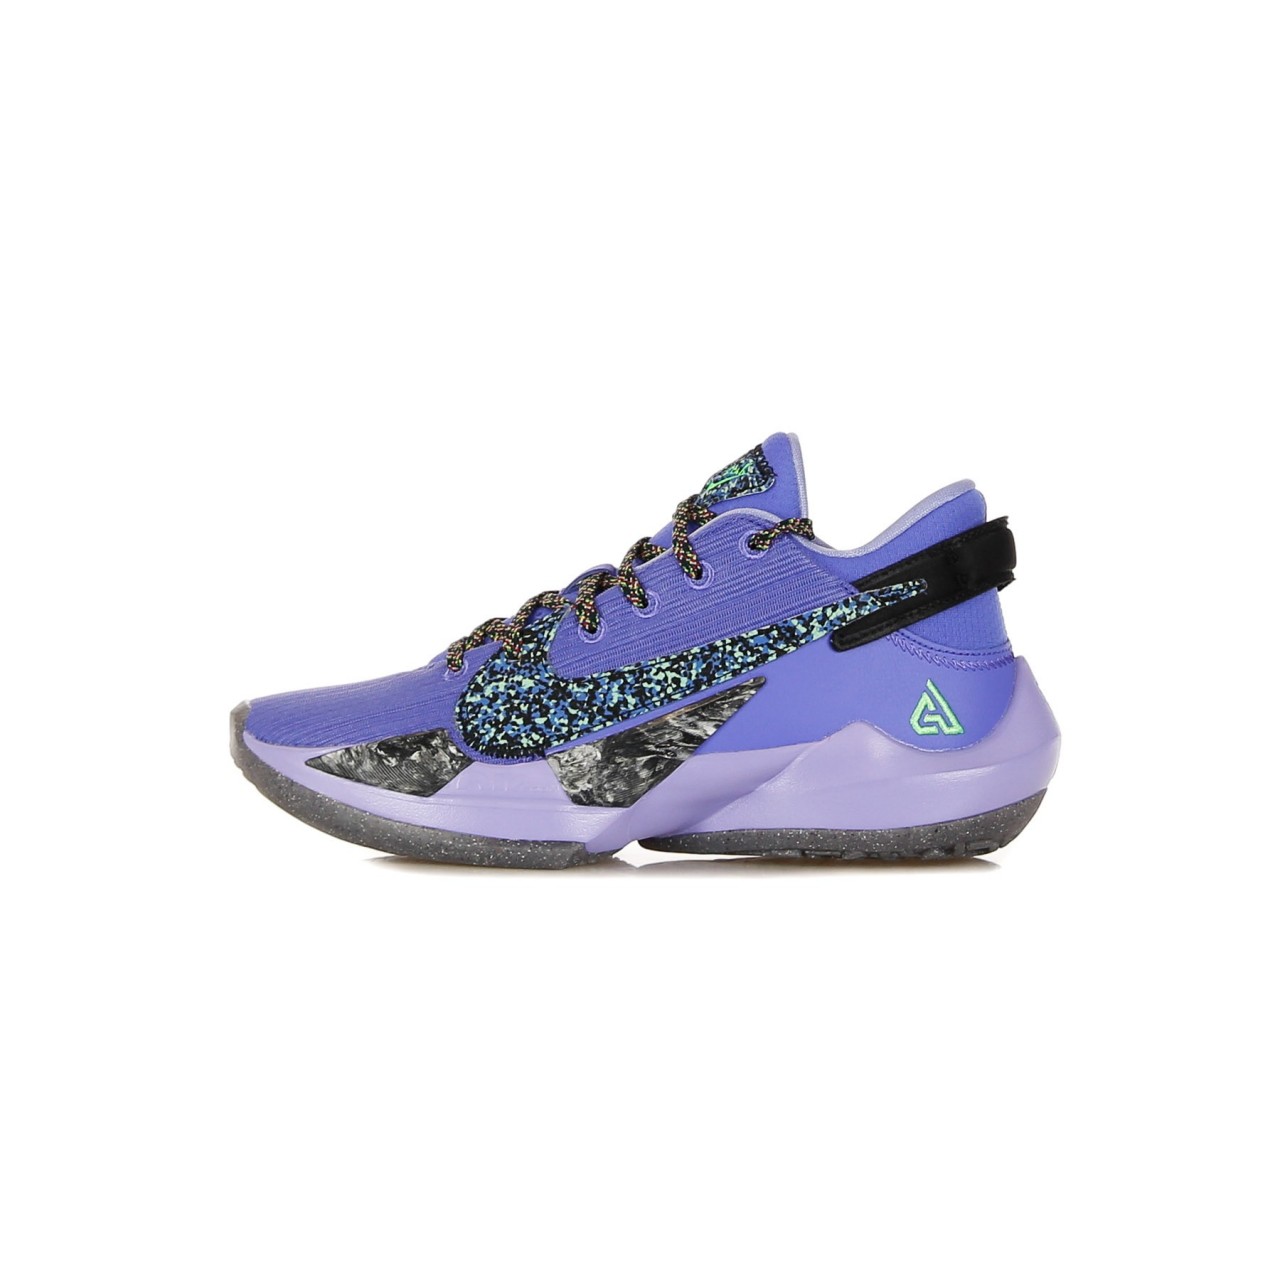 NIKE NBA ZOOM FREAK 2 &quot;PLAY FOR THE FUTURE&quot; CK5424-500